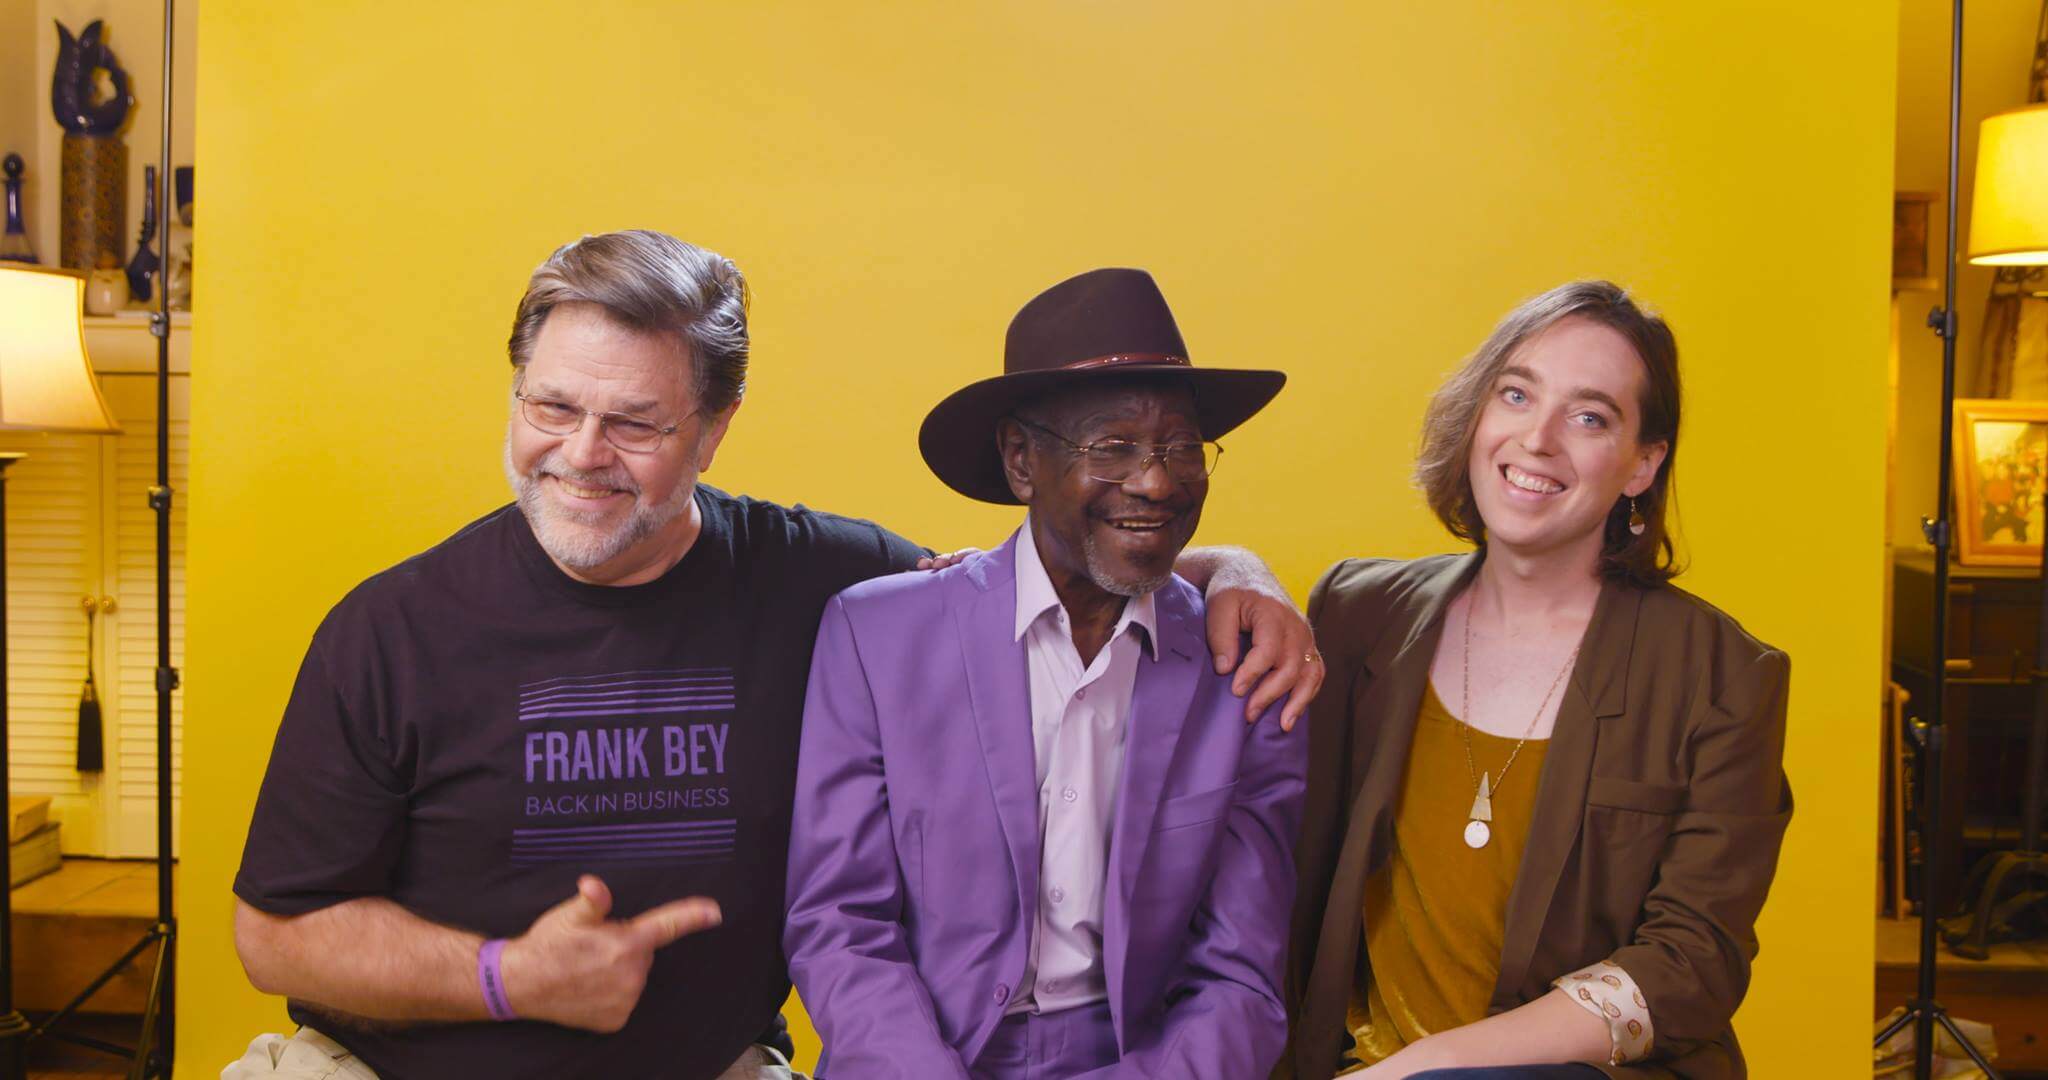 Production still from Frank Bey: You're Going to Miss Me. Frank Bey–a man in a wide-brimmed brown hat and purple pantsuit-- is seated between two other people. The person to the right of him wears a t-shirt that has the text "Frank Bey: Back in Business" on it, and has one arm around the shoulder of the man in the middle, and with the other arm is pointing towards the man in the middle. The person to the left of him is the director, Marie Hinson. Partial view of a living space is seen on either edge of the golden-yellow backdrop.